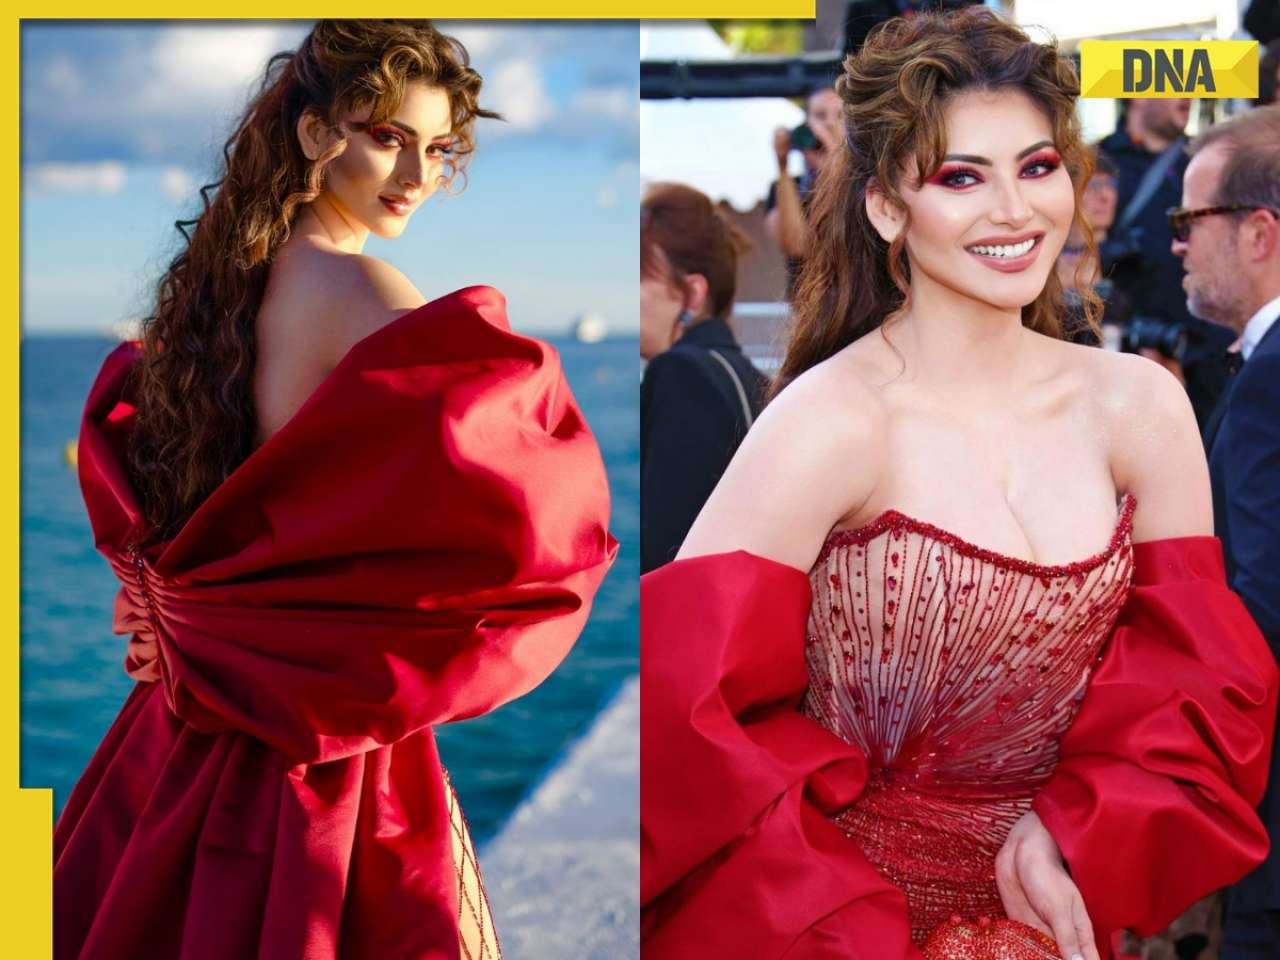 In pics: Urvashi Rautela sizzles in red strapless gown at Cannes Film Festival, fans call her 'Disney princess'